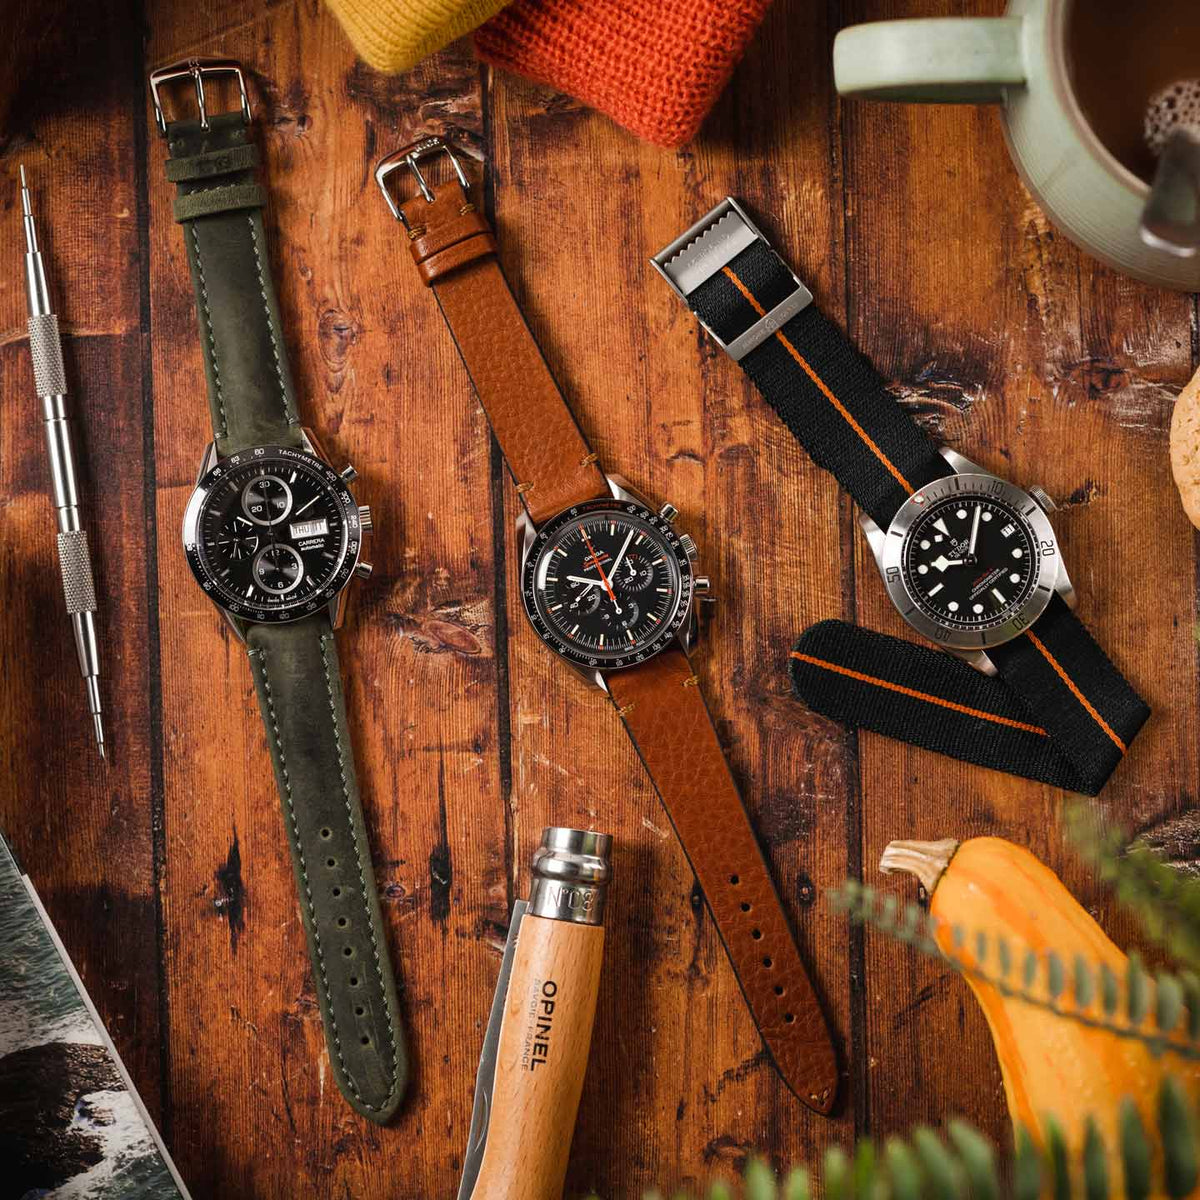 Best Watch and Straps for Cold Weather